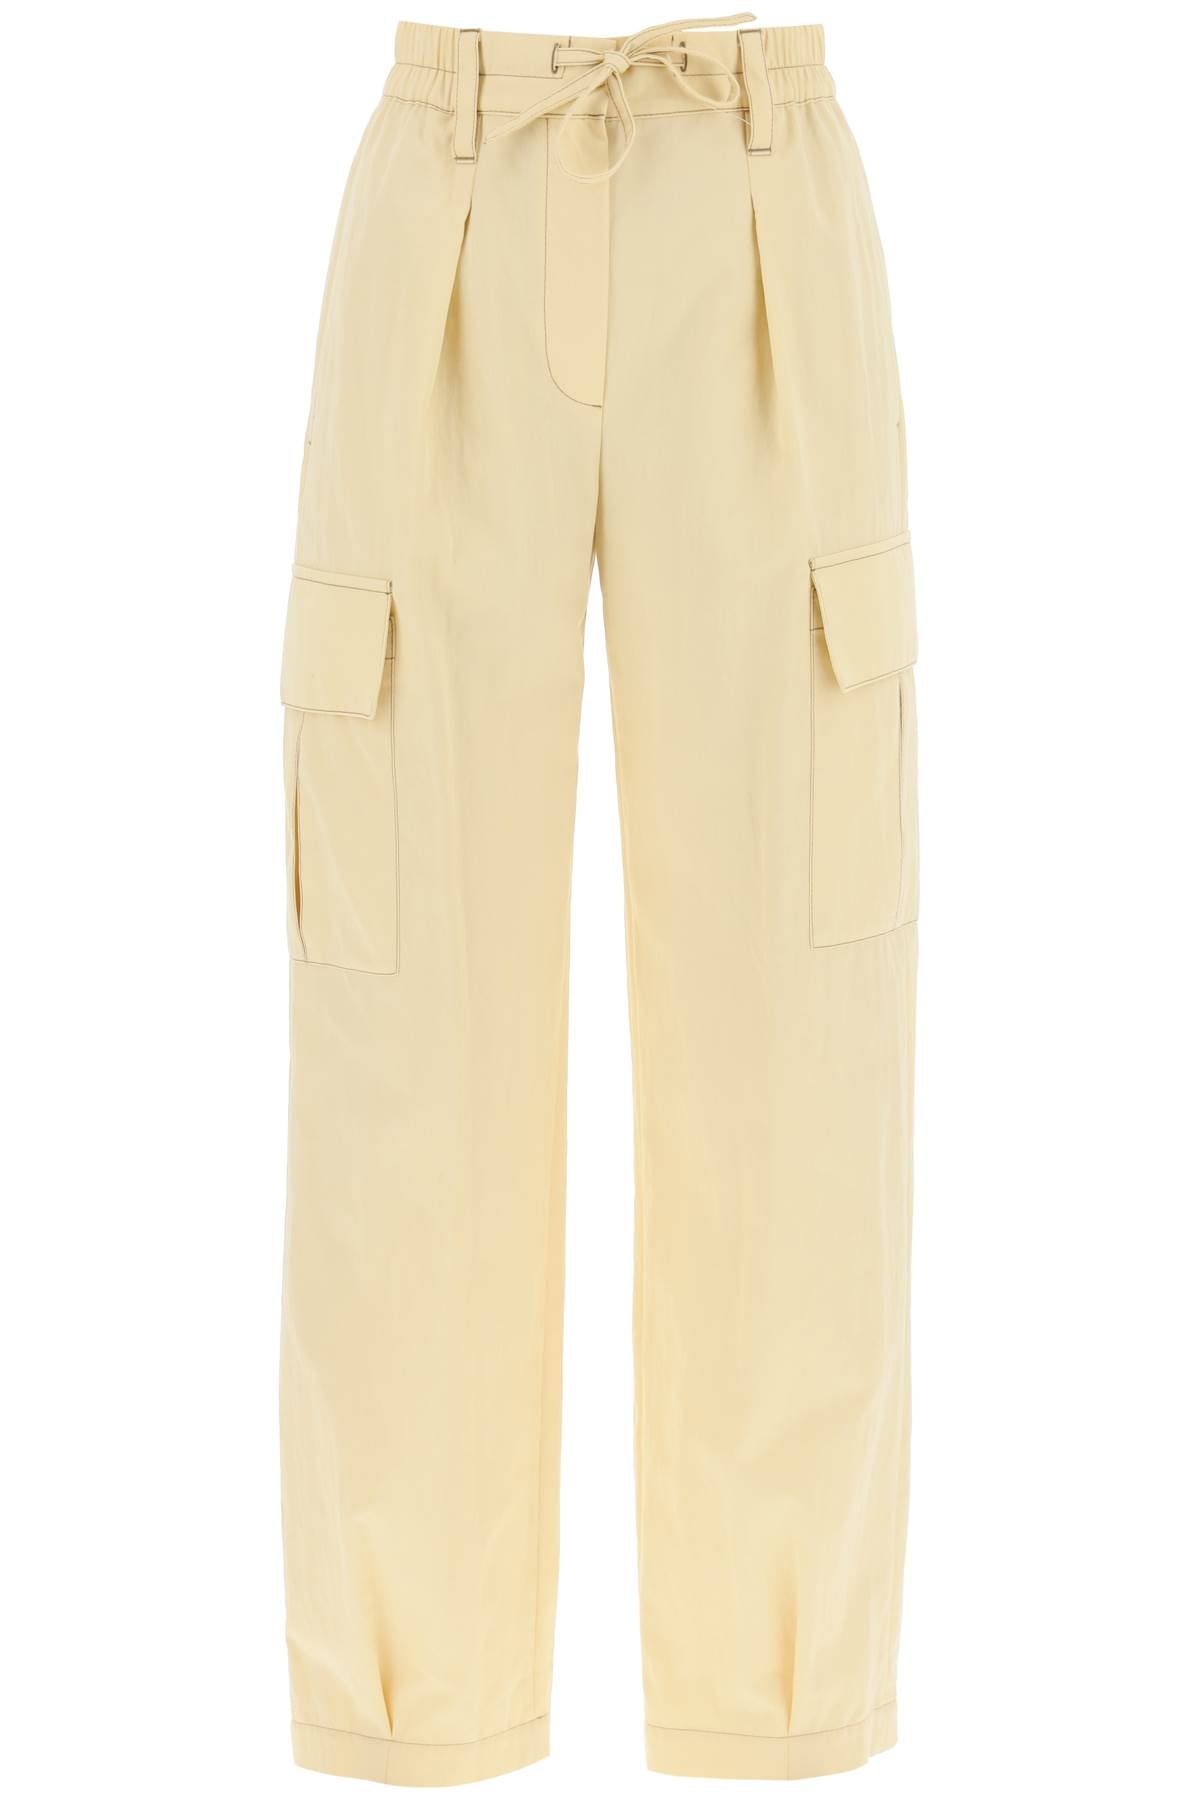 Brunello cucinelli gabardine utility pants with pockets and-0